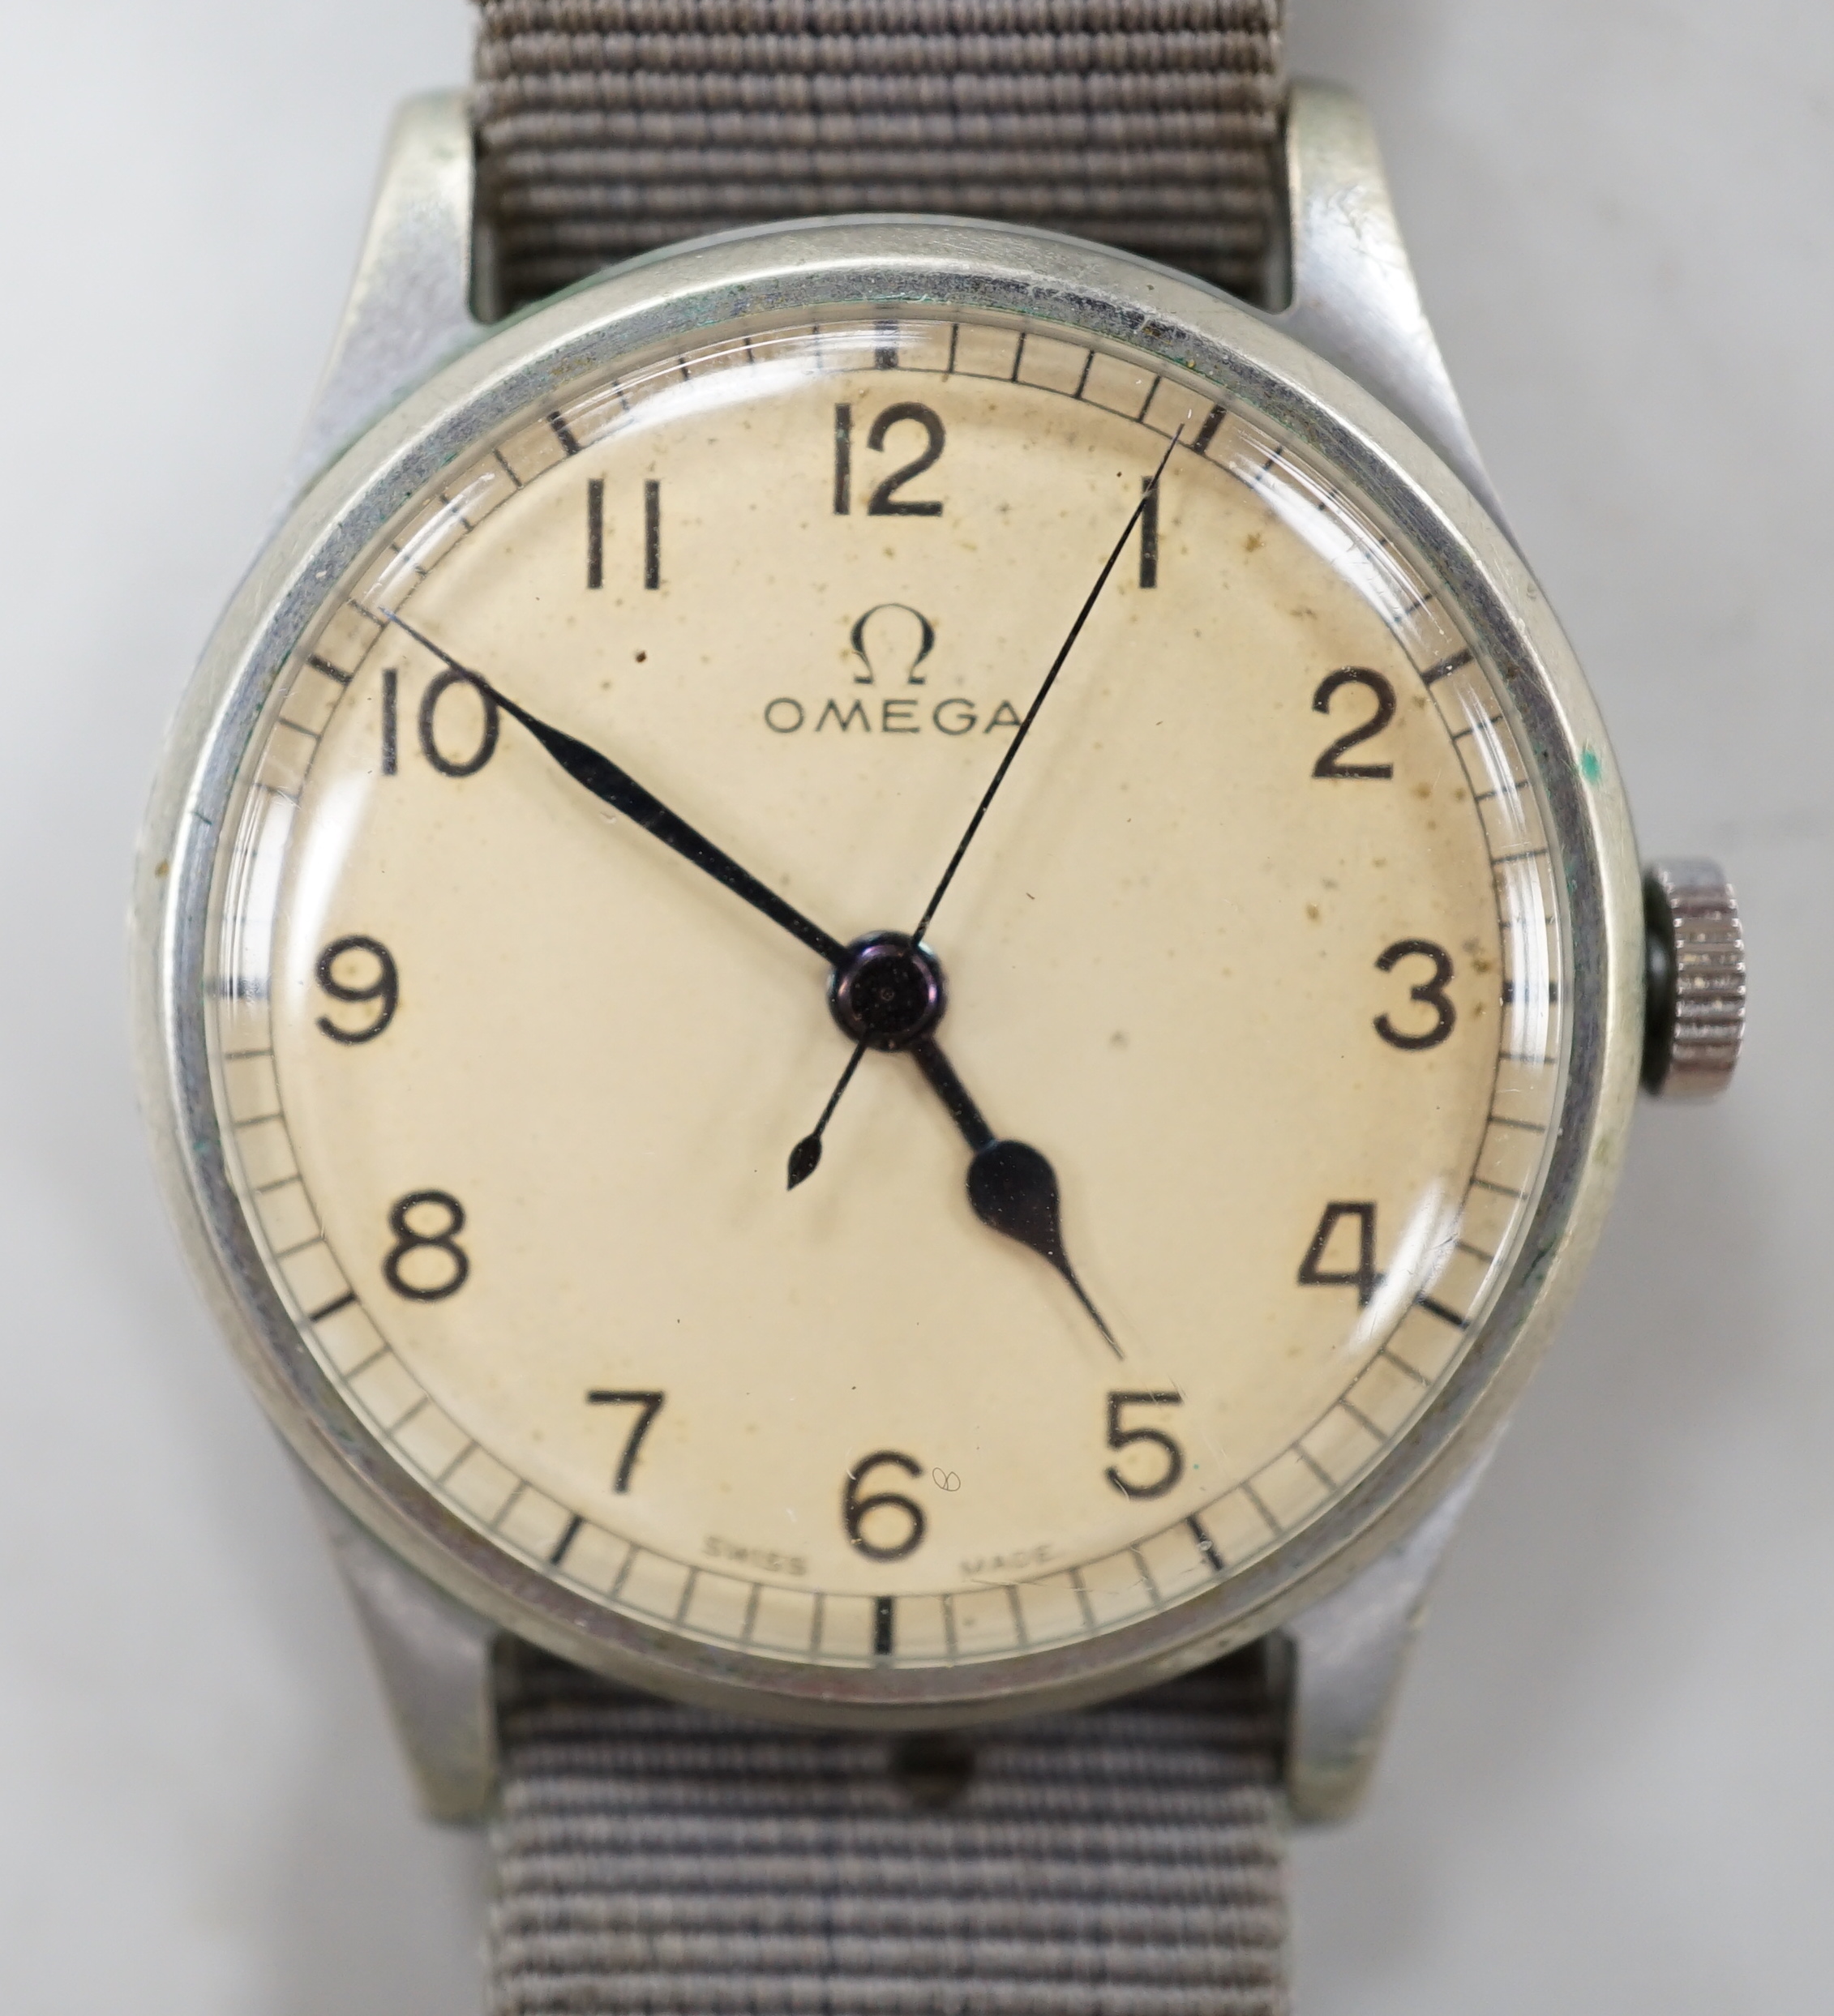 A gentleman's early 1940's stainless steel military issue Omega manual wind wrist watch, on fabric strap, the case back inscribed 'HS arrow 8 over 3282', movement c.30T2.